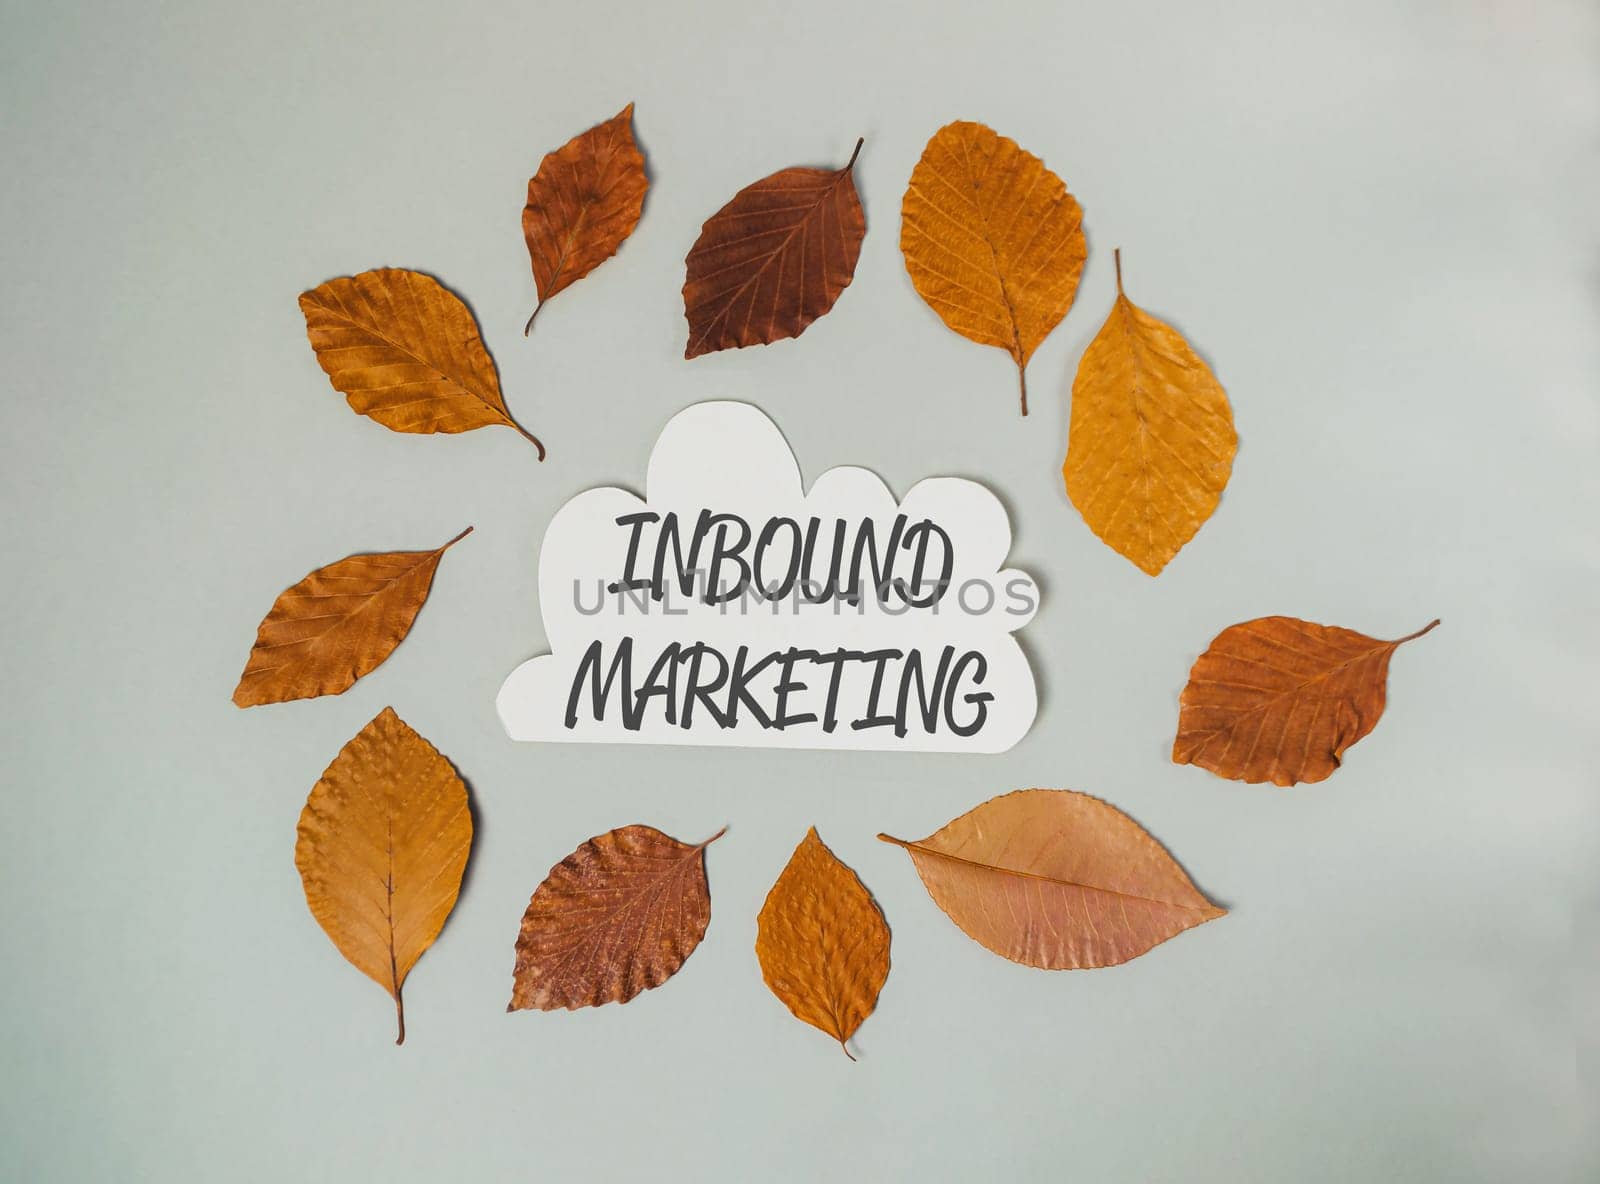 A leafy circle with the word Inbound Marketing written in the center. The leaves are scattered around the circle, creating a sense of abundance and growth